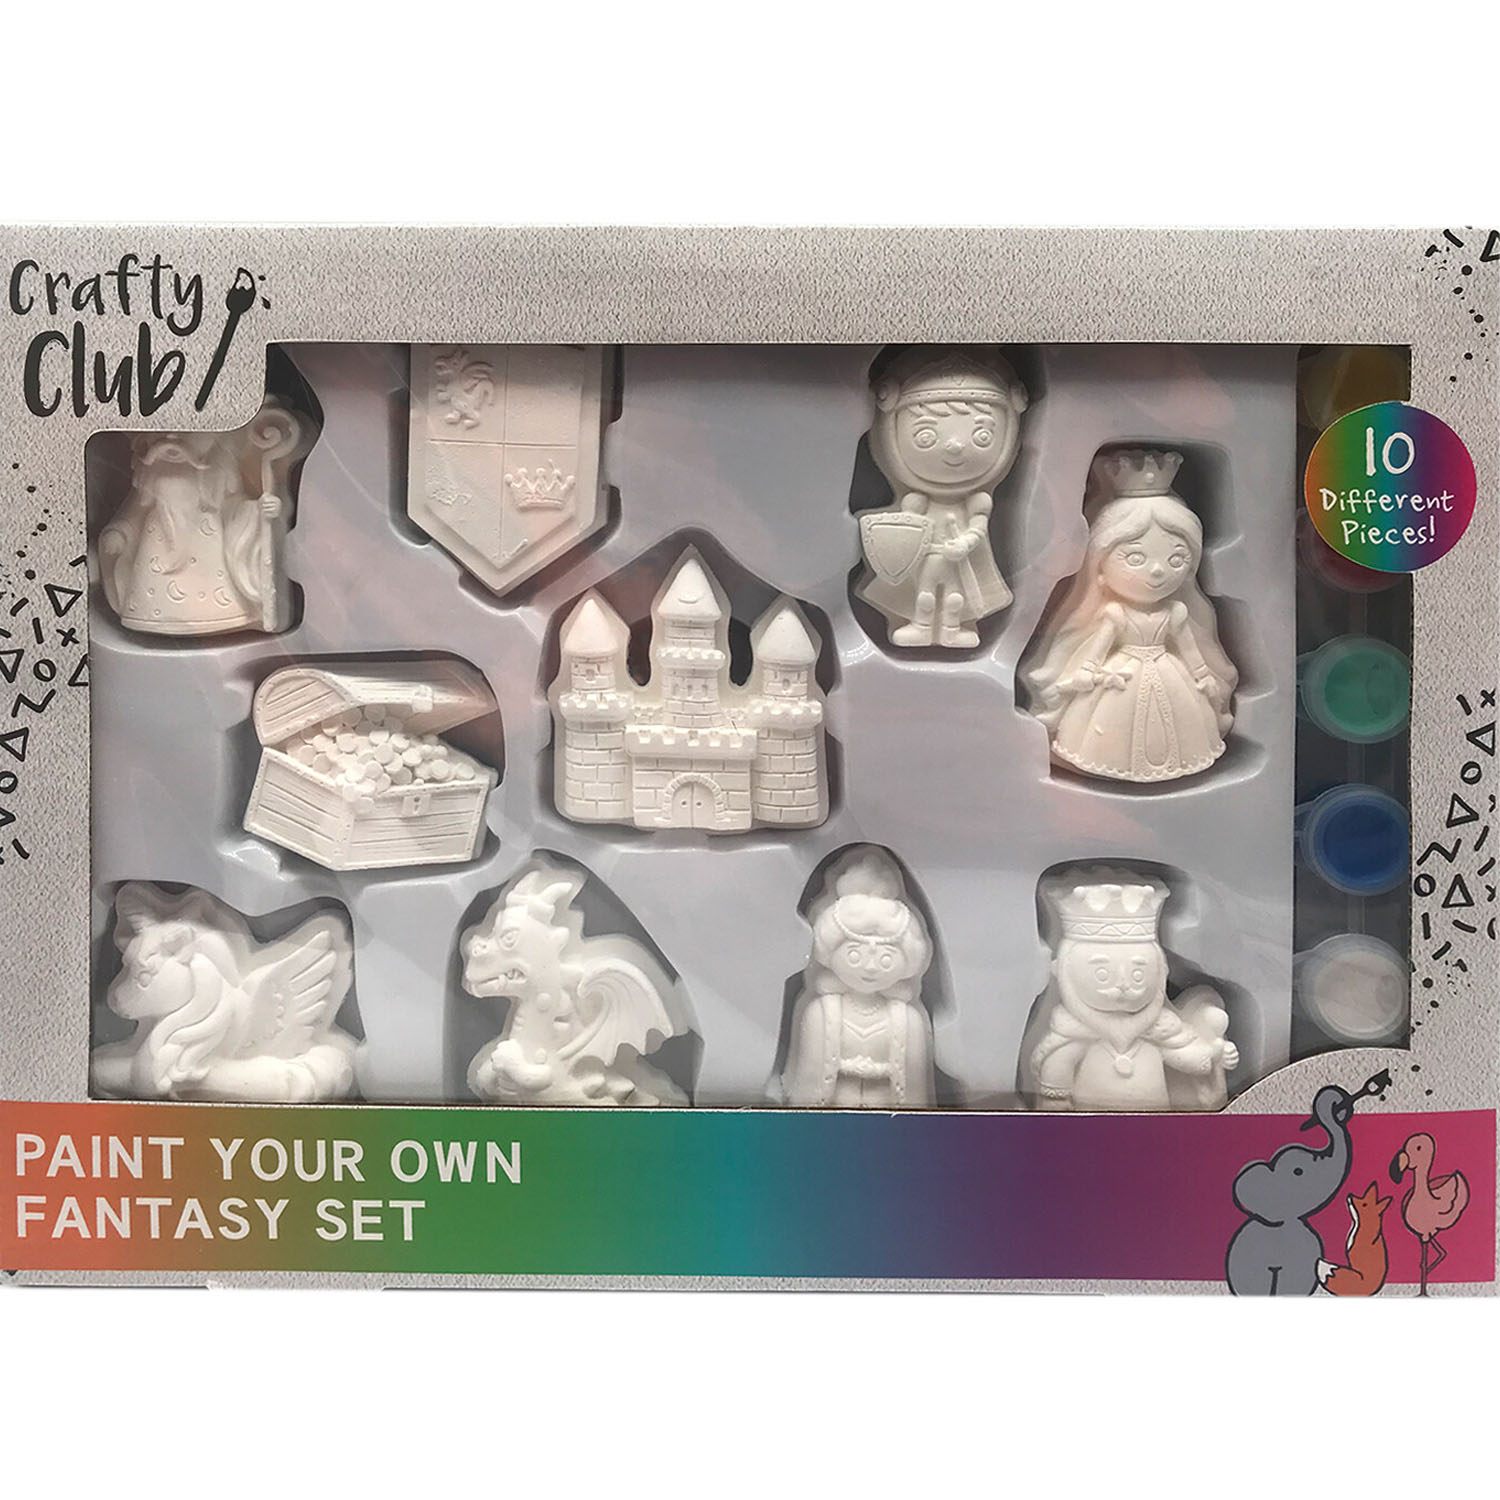 Crafty Club Paint Your Own Fantasy Plaster Figures Set 10 Pack Image